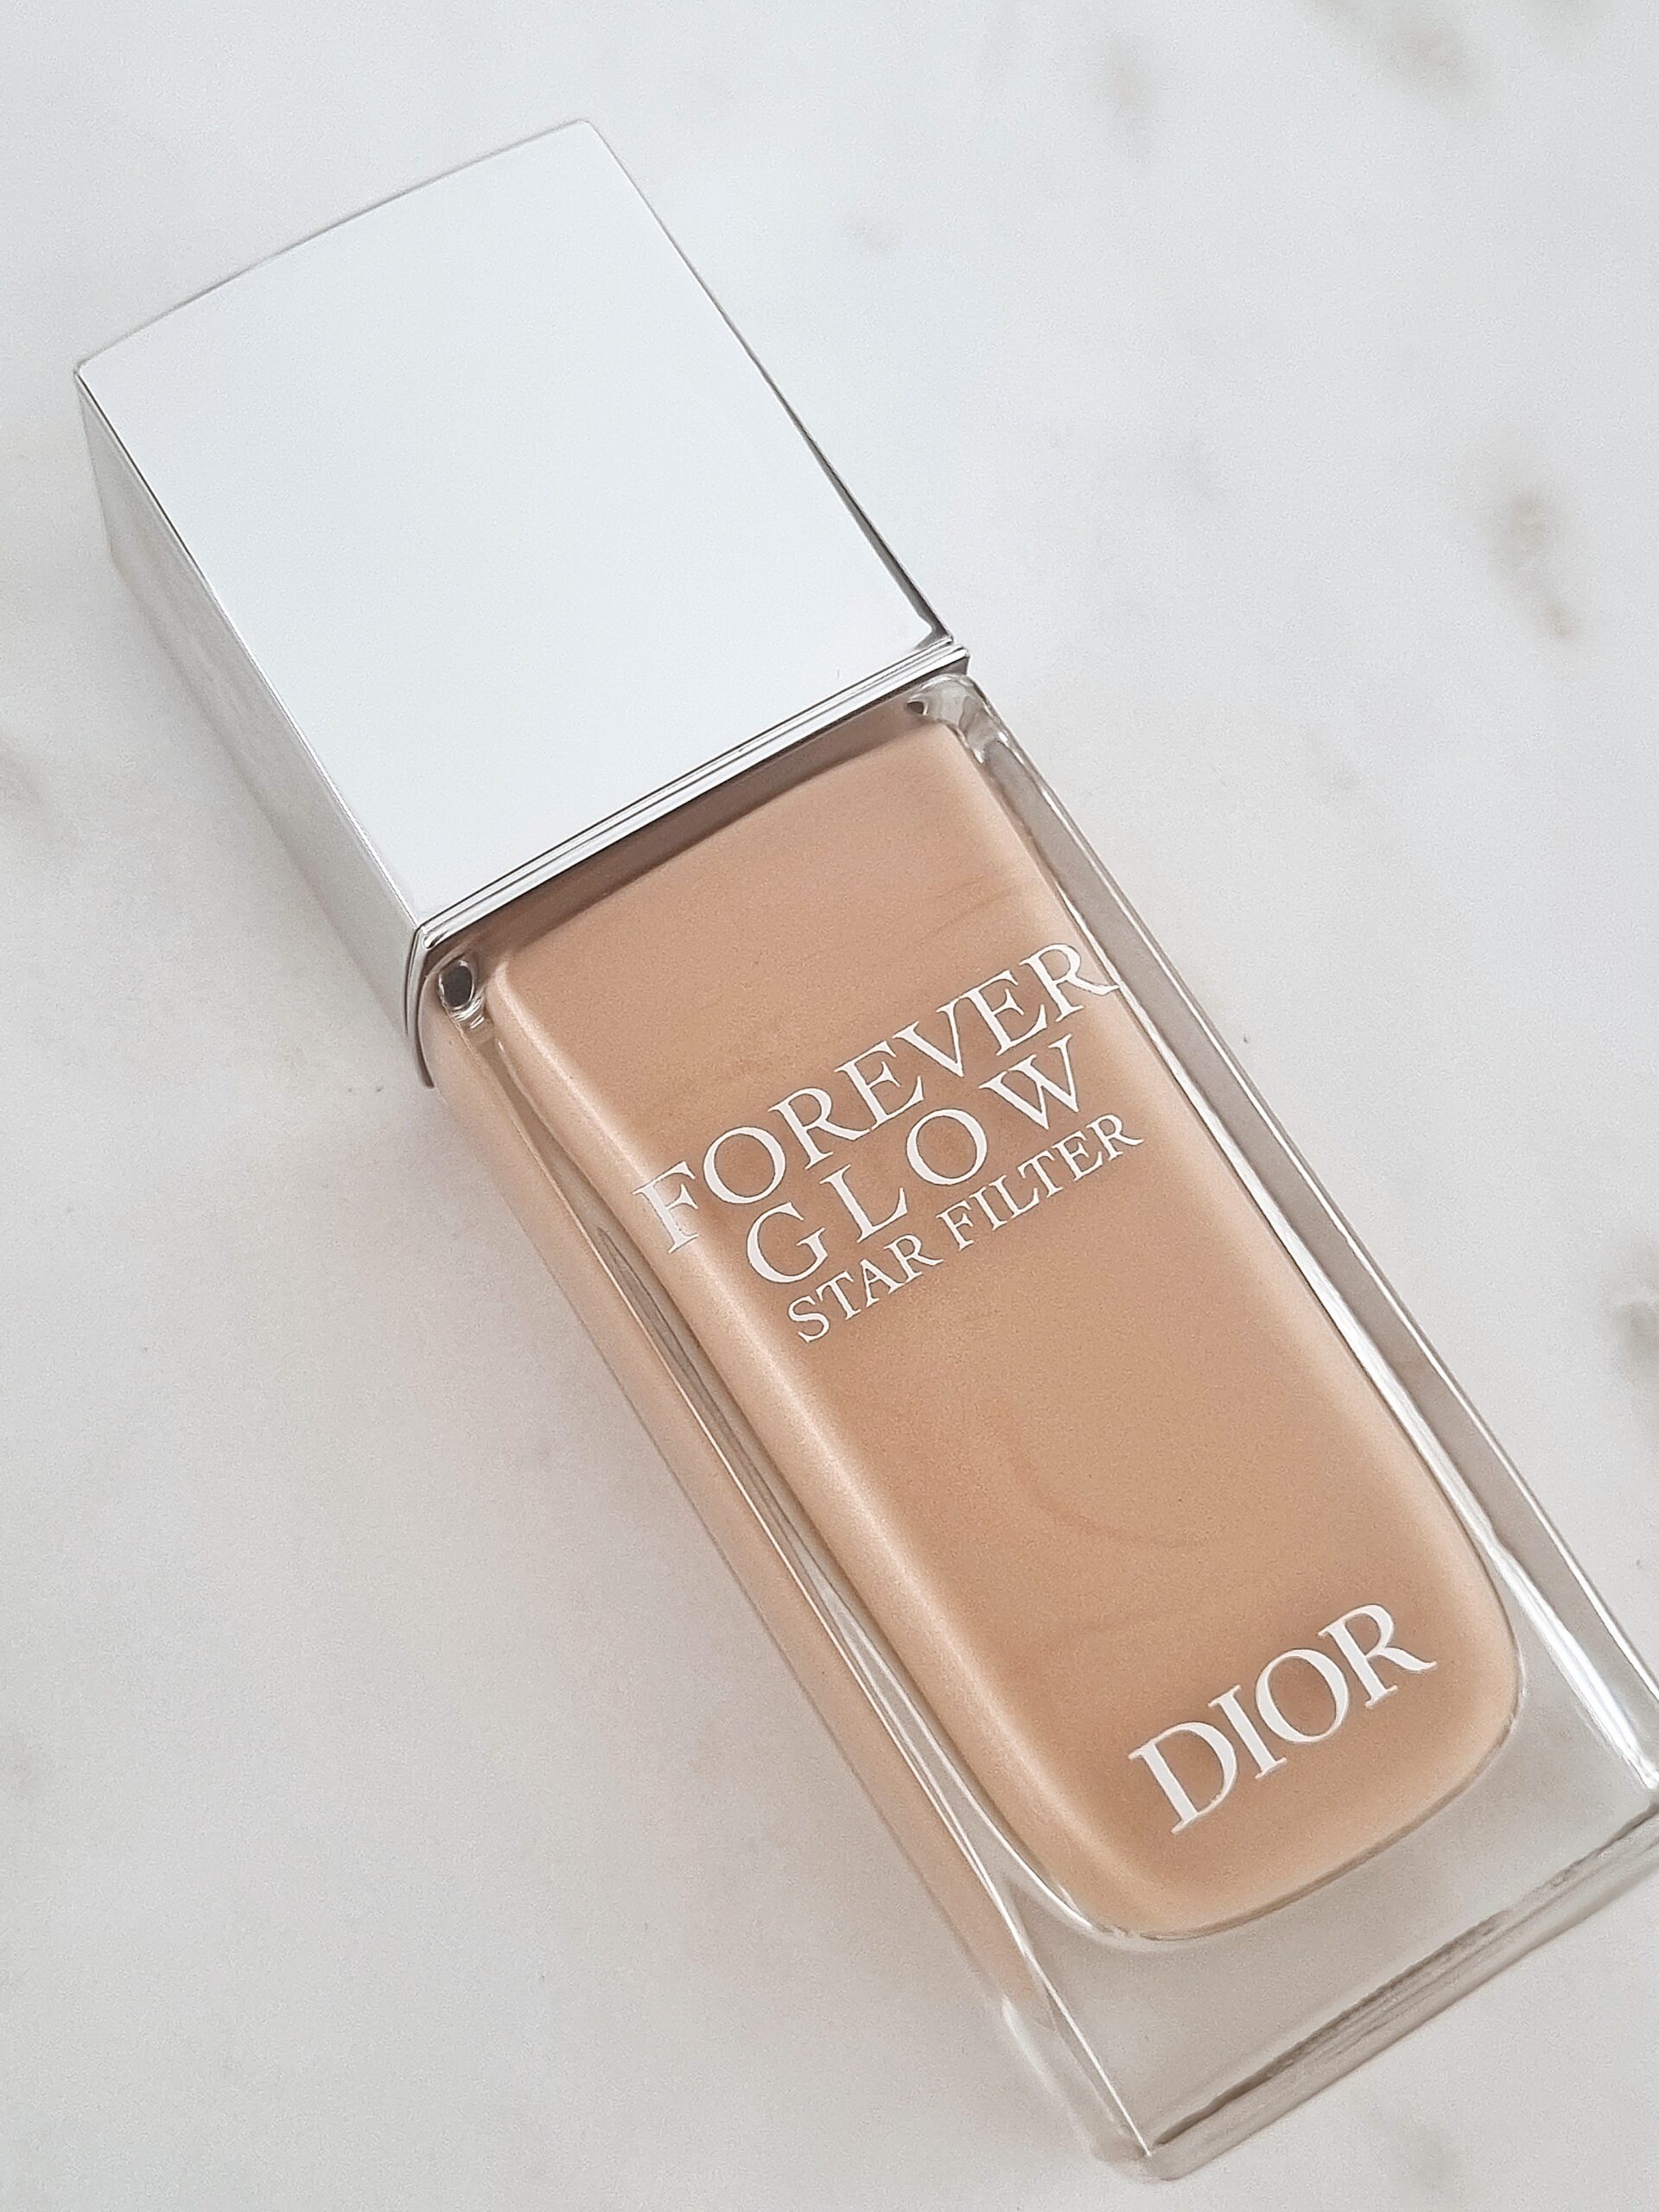 New Dior Forever Glow Star Filter